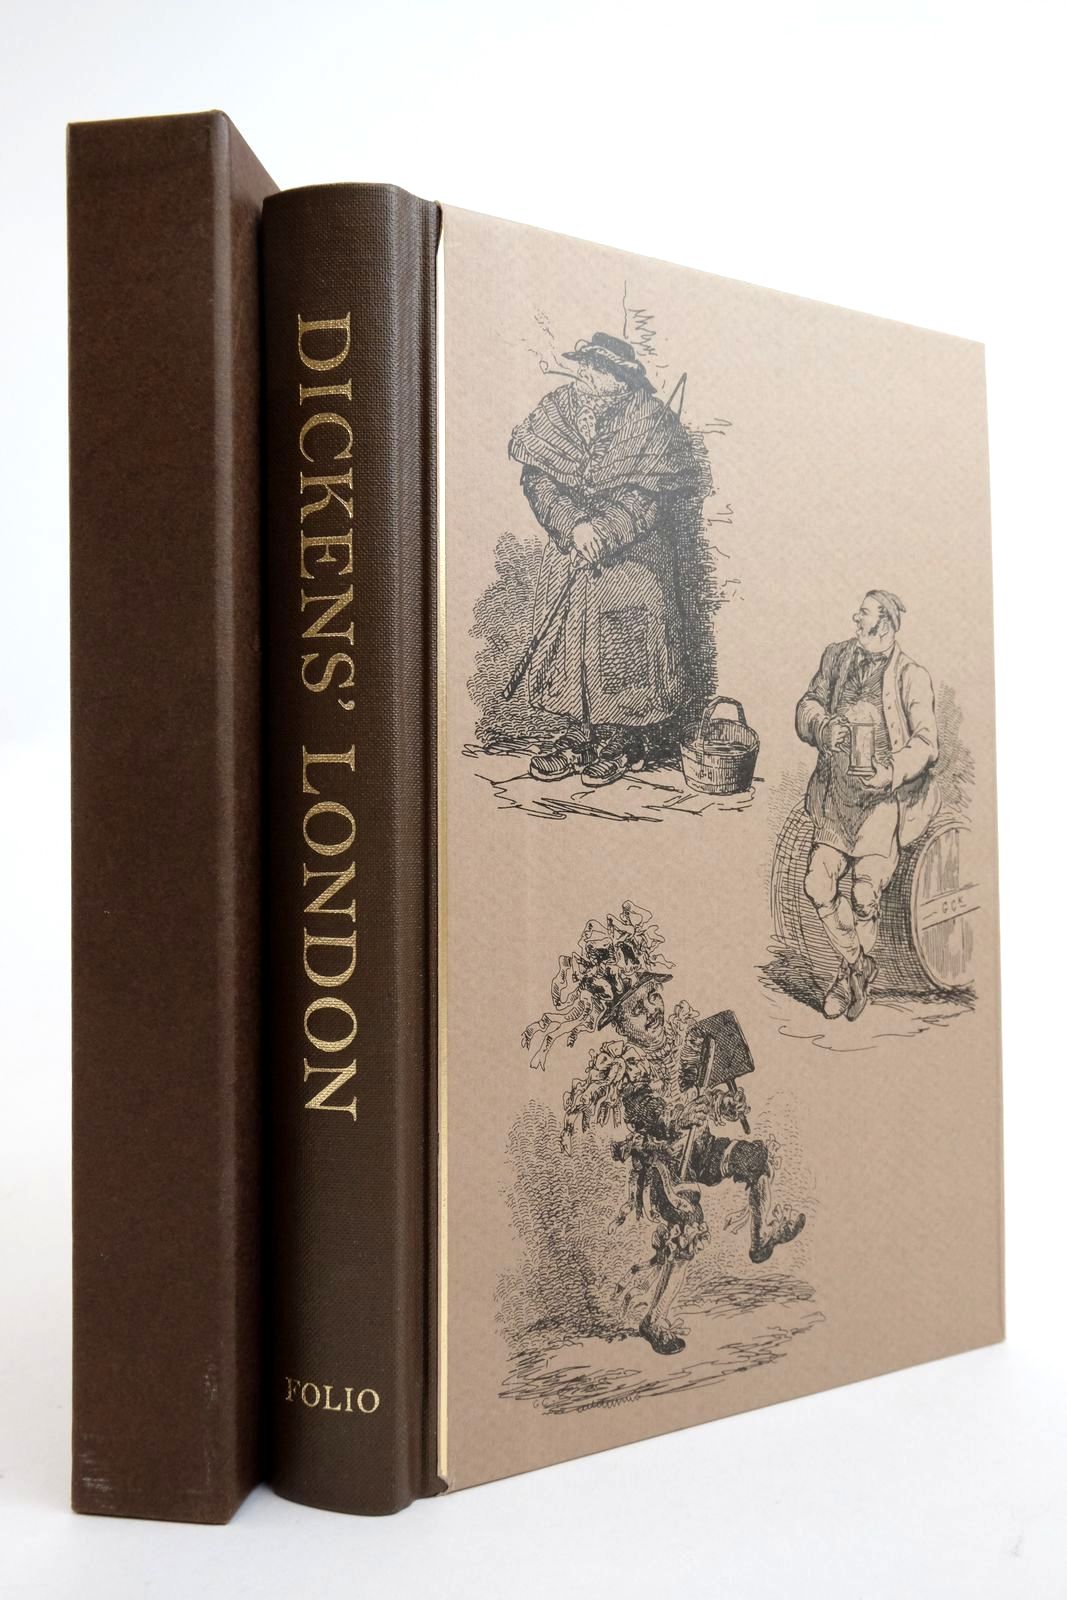 Photo of DICKENS' LONDON written by Dickens, Charles Vallance, Rosalind illustrated by Cruikshank, George published by Folio Society (STOCK CODE: 2136512)  for sale by Stella & Rose's Books